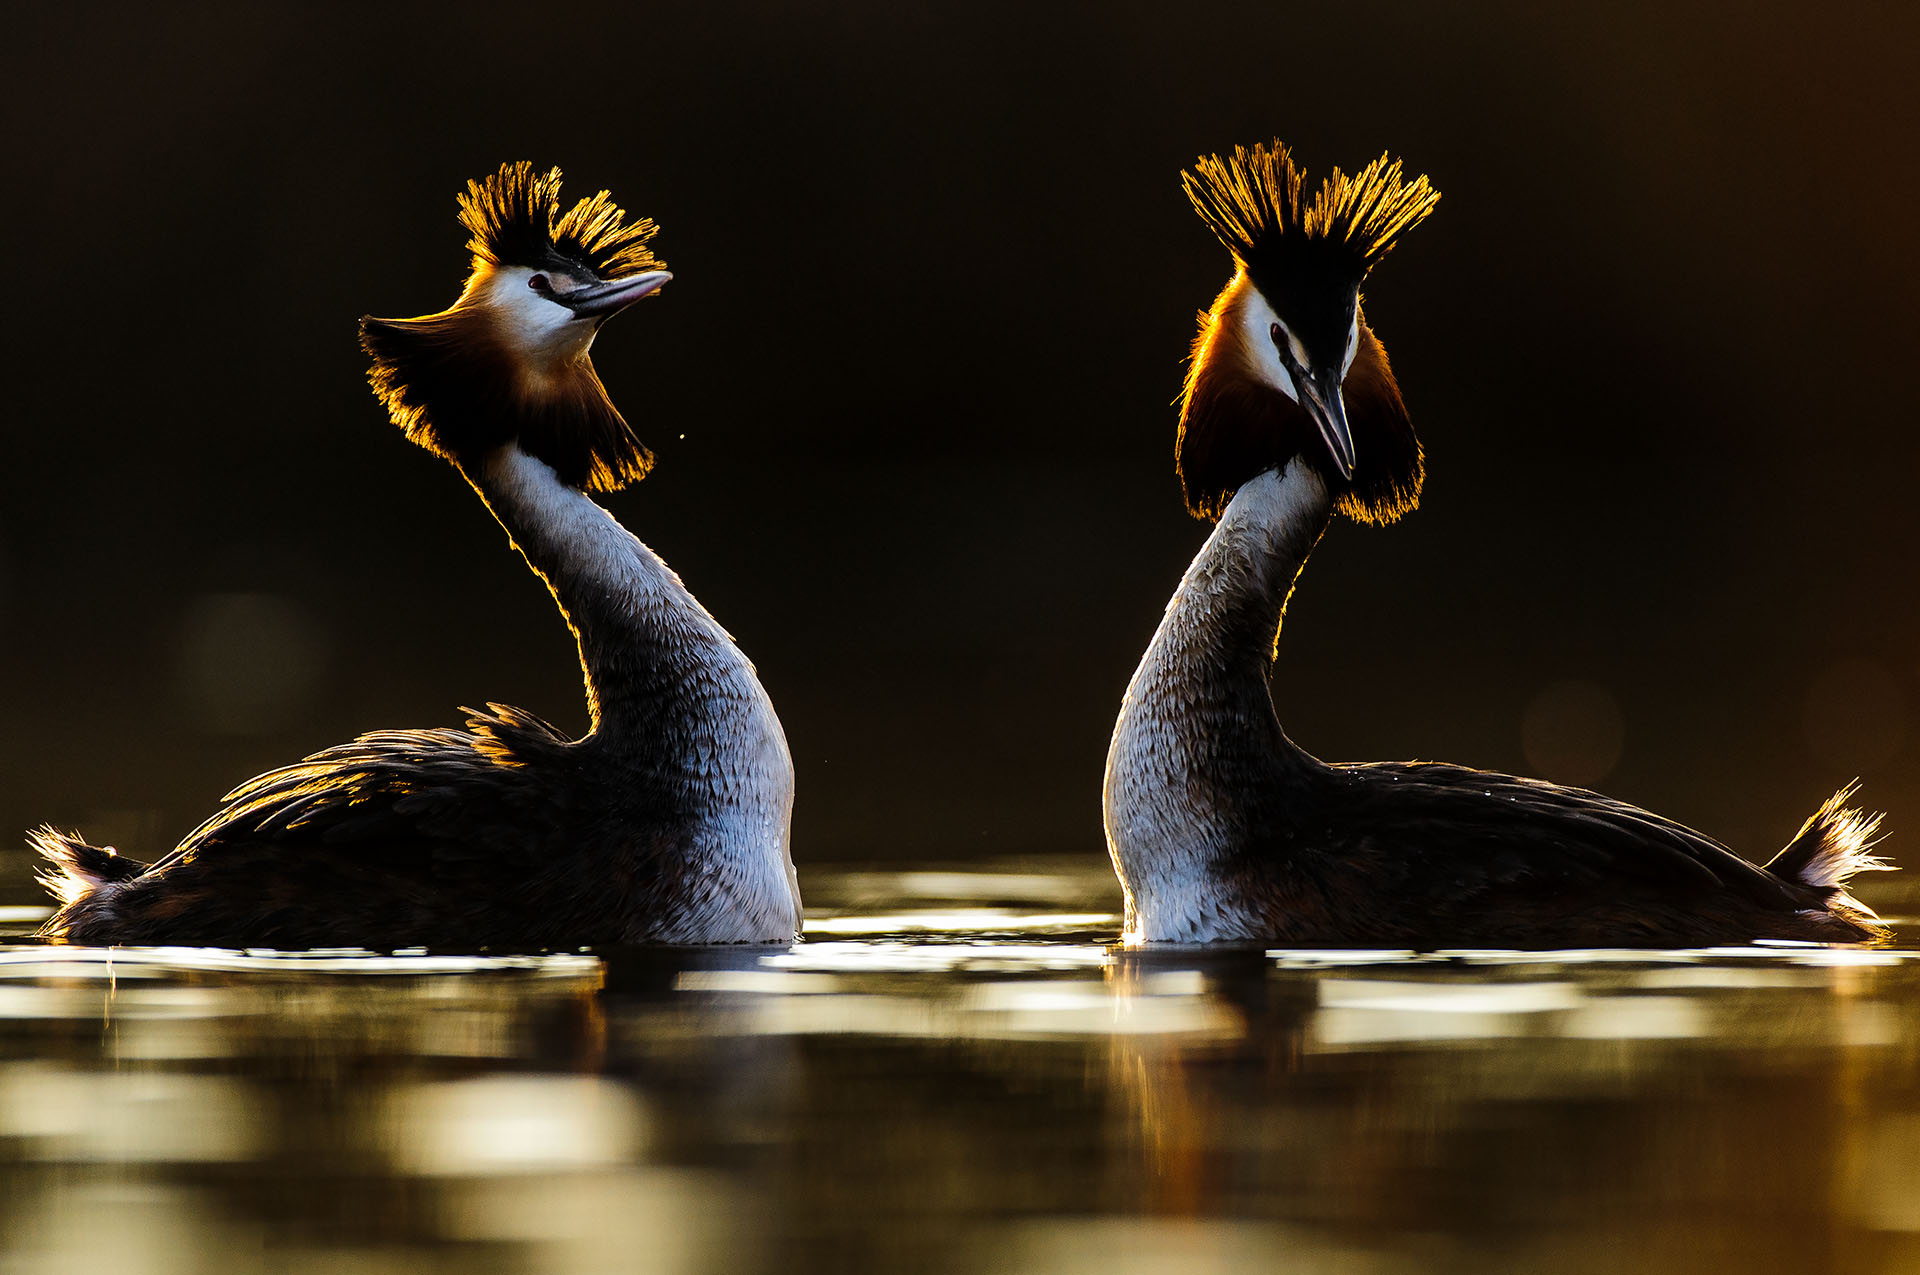 Male and female great crested grebes dancing